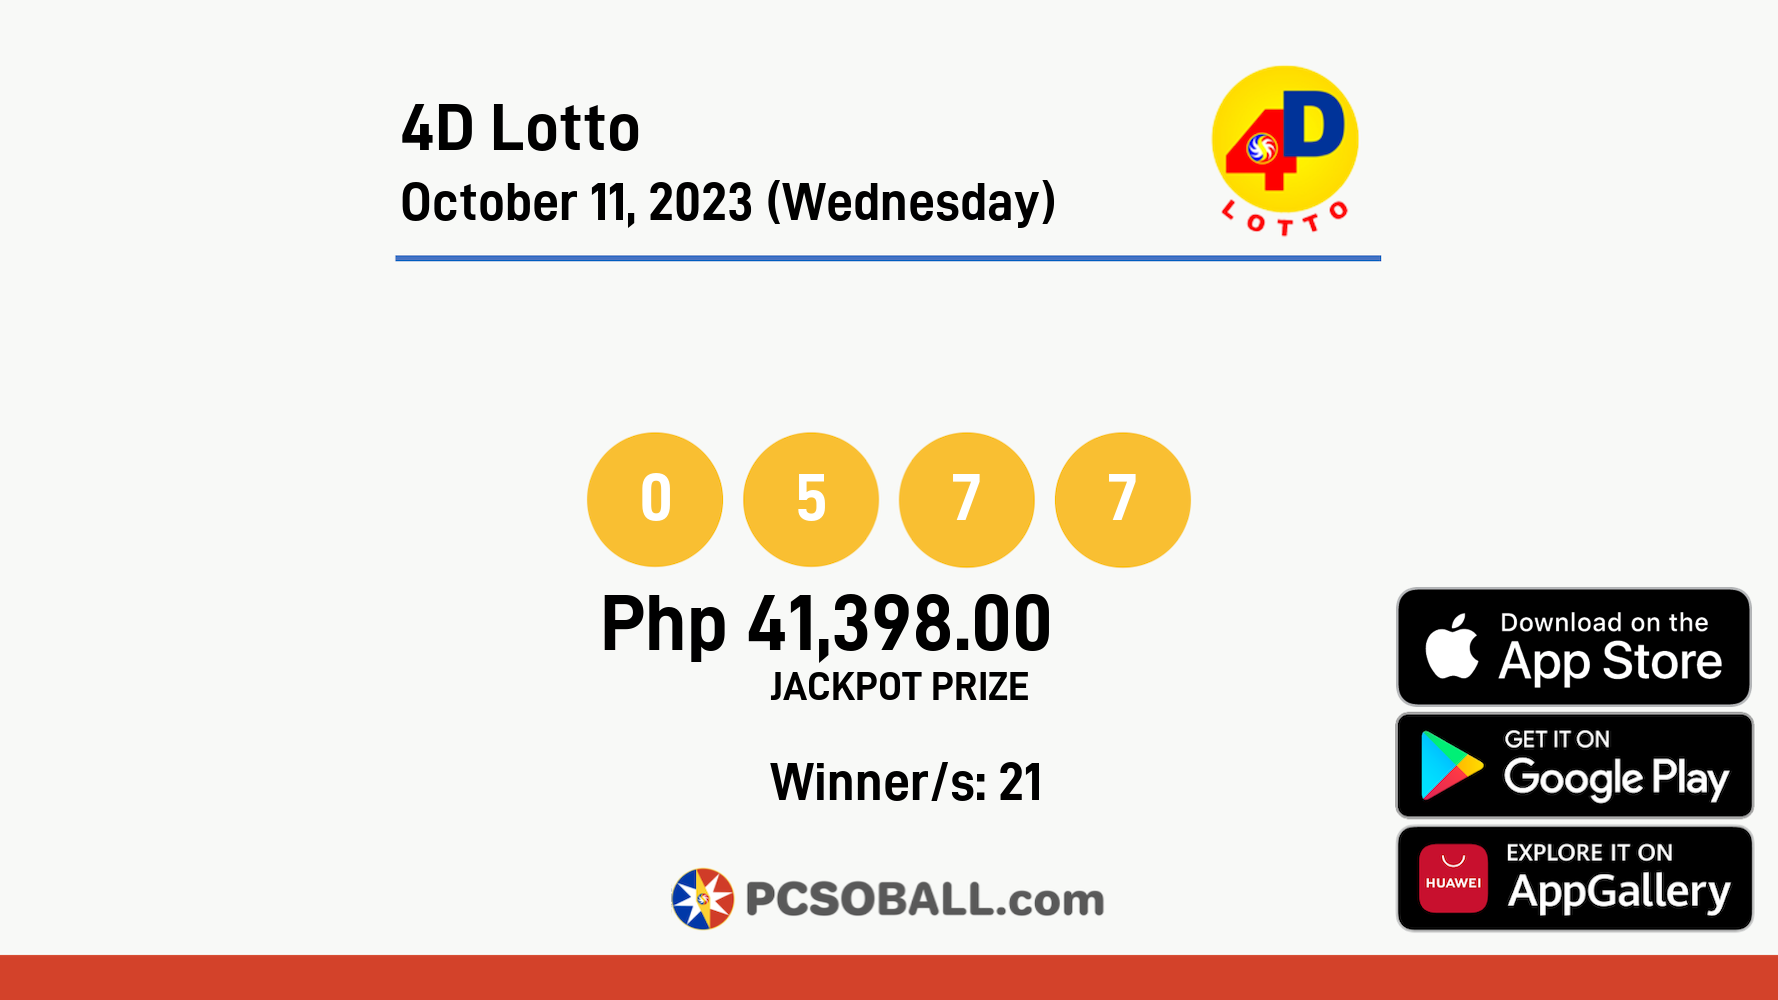 4D Lotto October 11, 2023 (Wednesday) Result